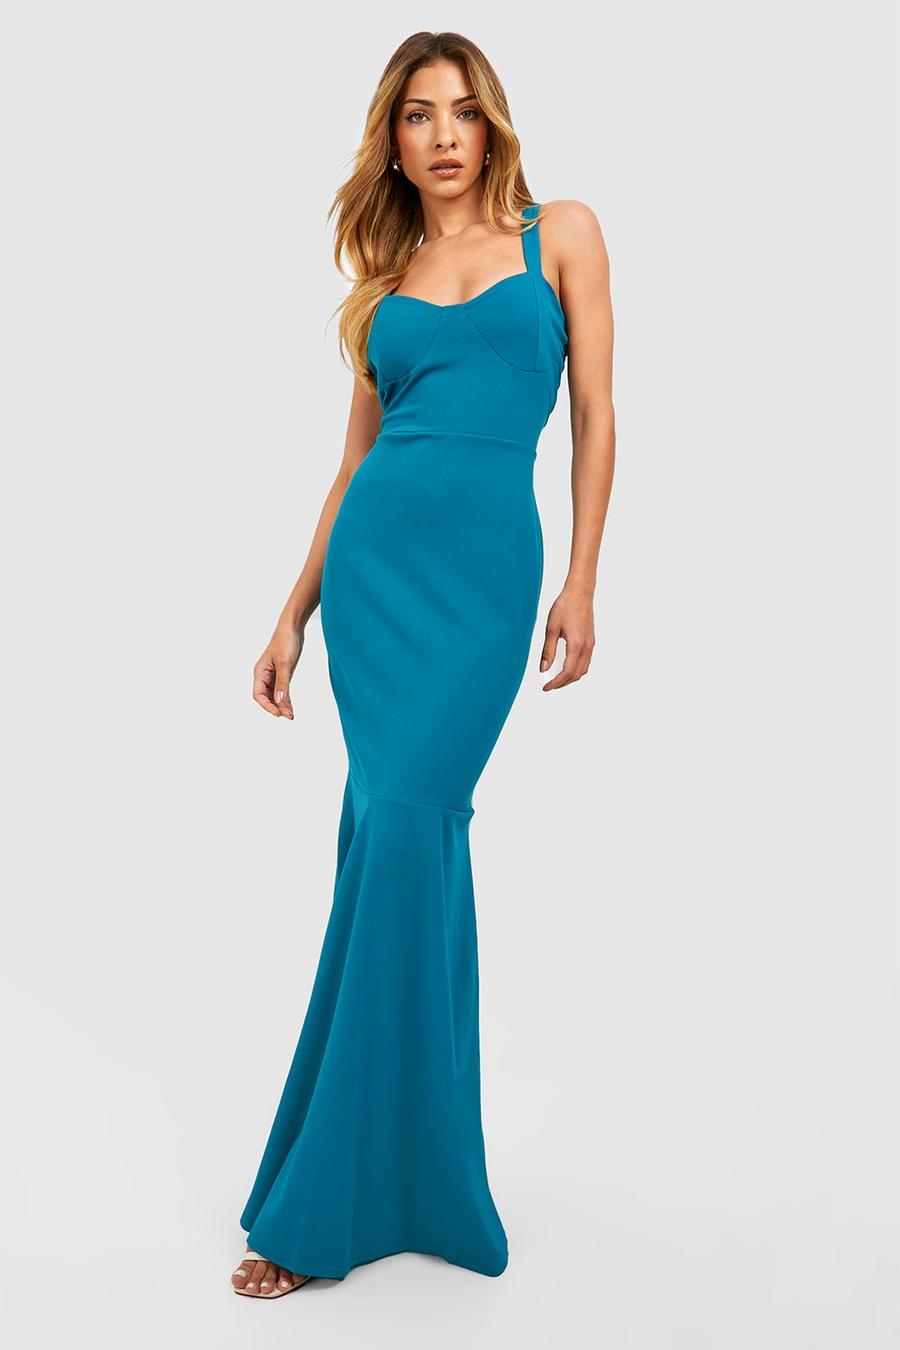 Teal Fitted Fishtail Maxi Bridesmaid Dress